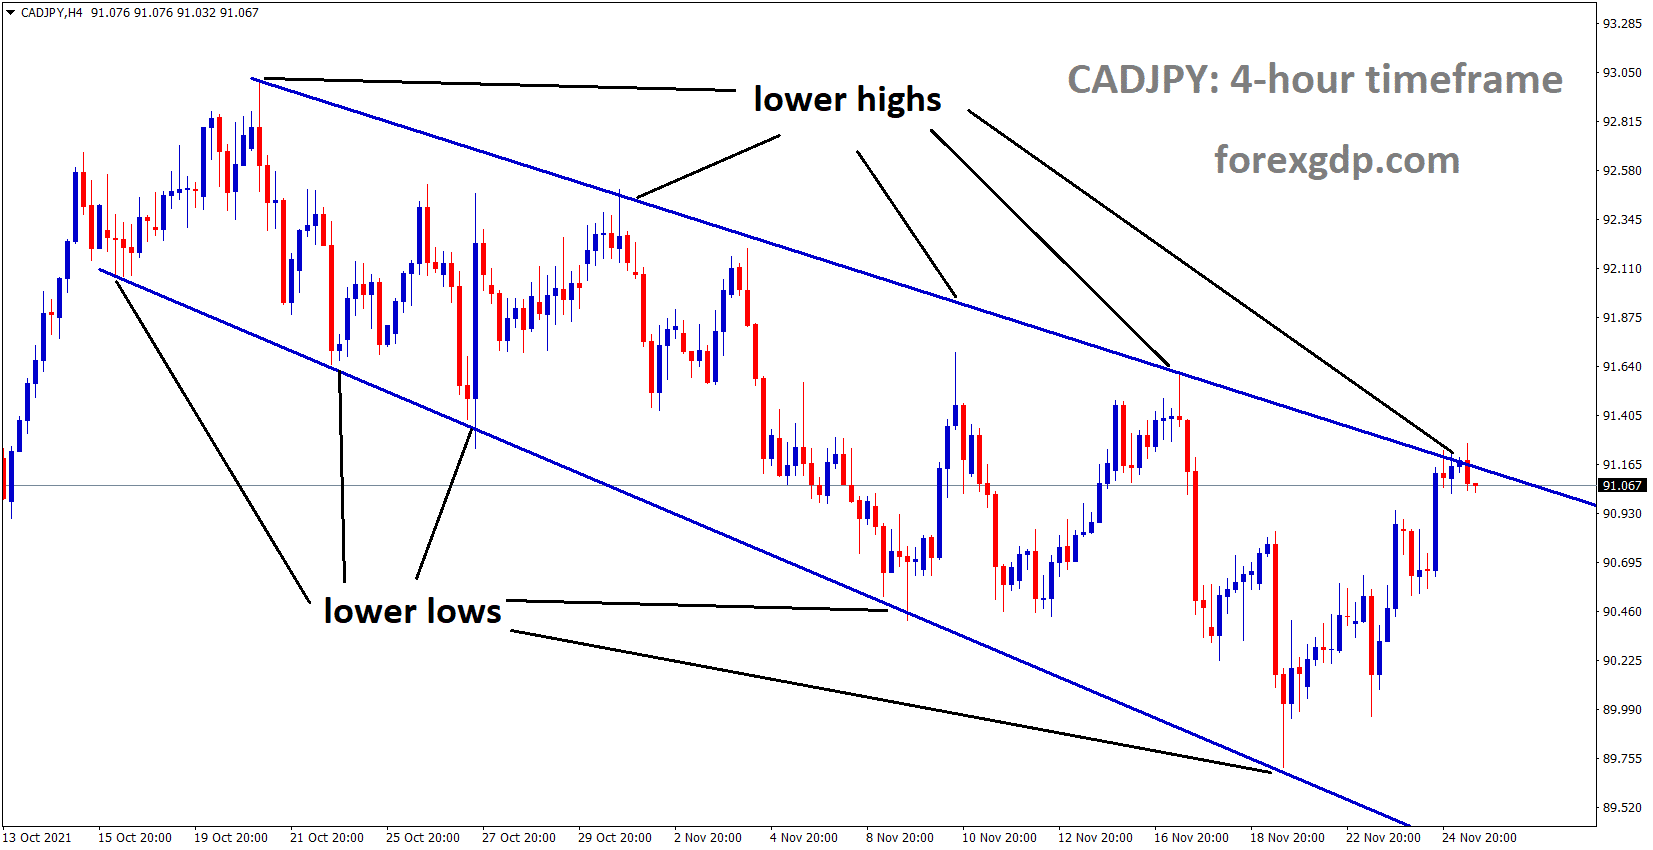 CADJPY is moving in the Descending channel and the market reached the lower high of the Channel